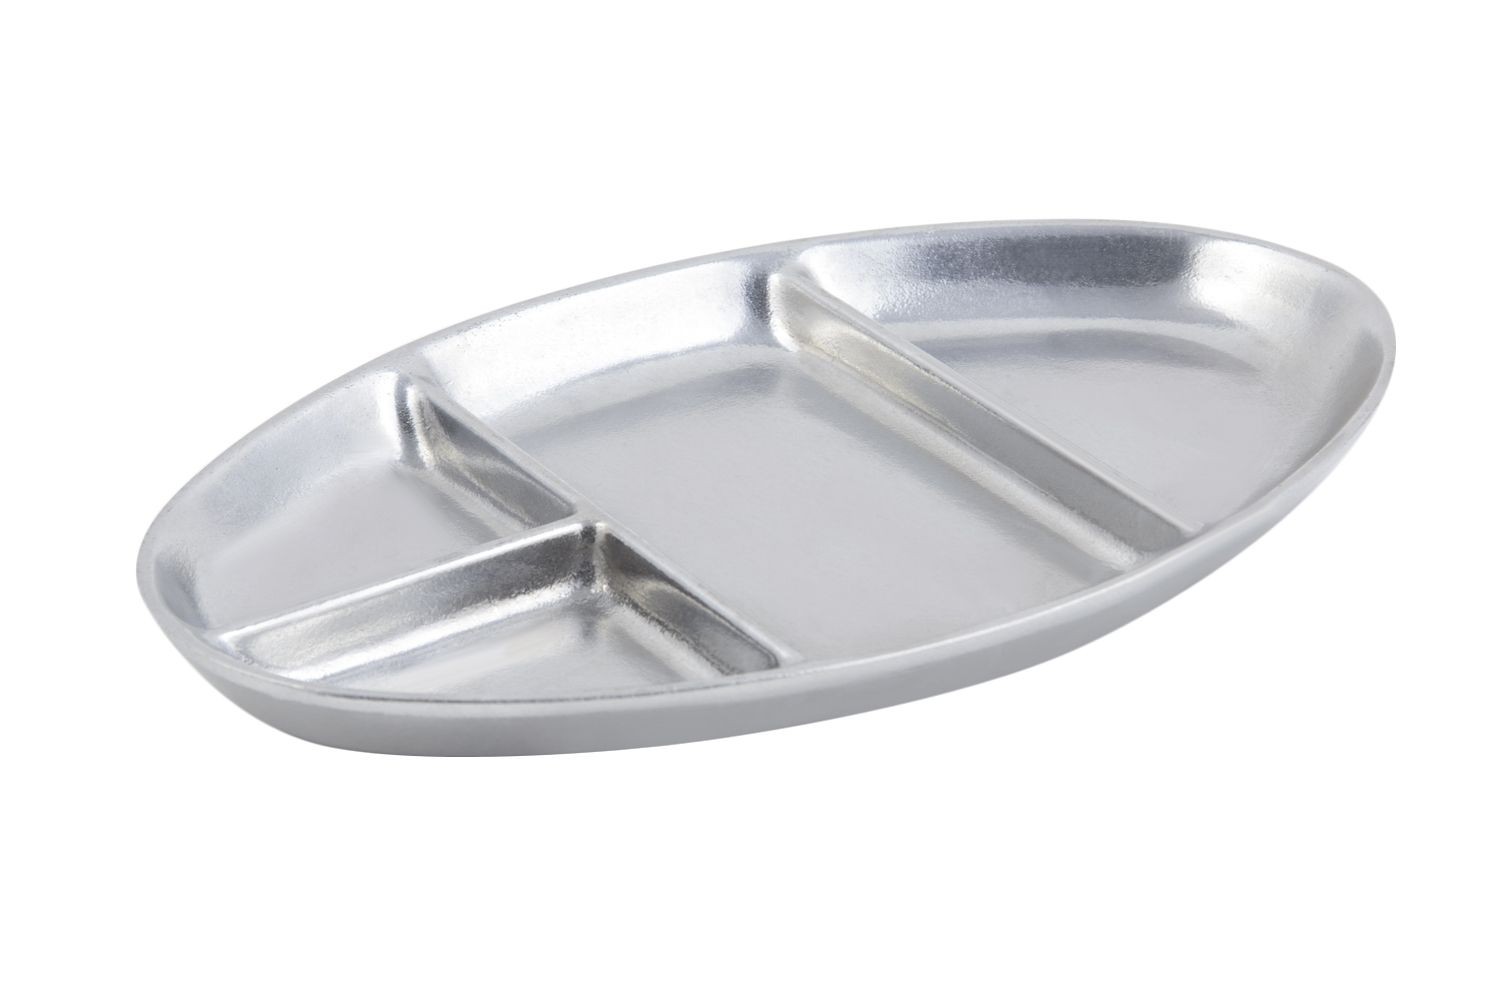 Bon Chef 2020P Four-Compartment Tray, Pewter Glo 7 1/2" x 11 3/4", Set of 6